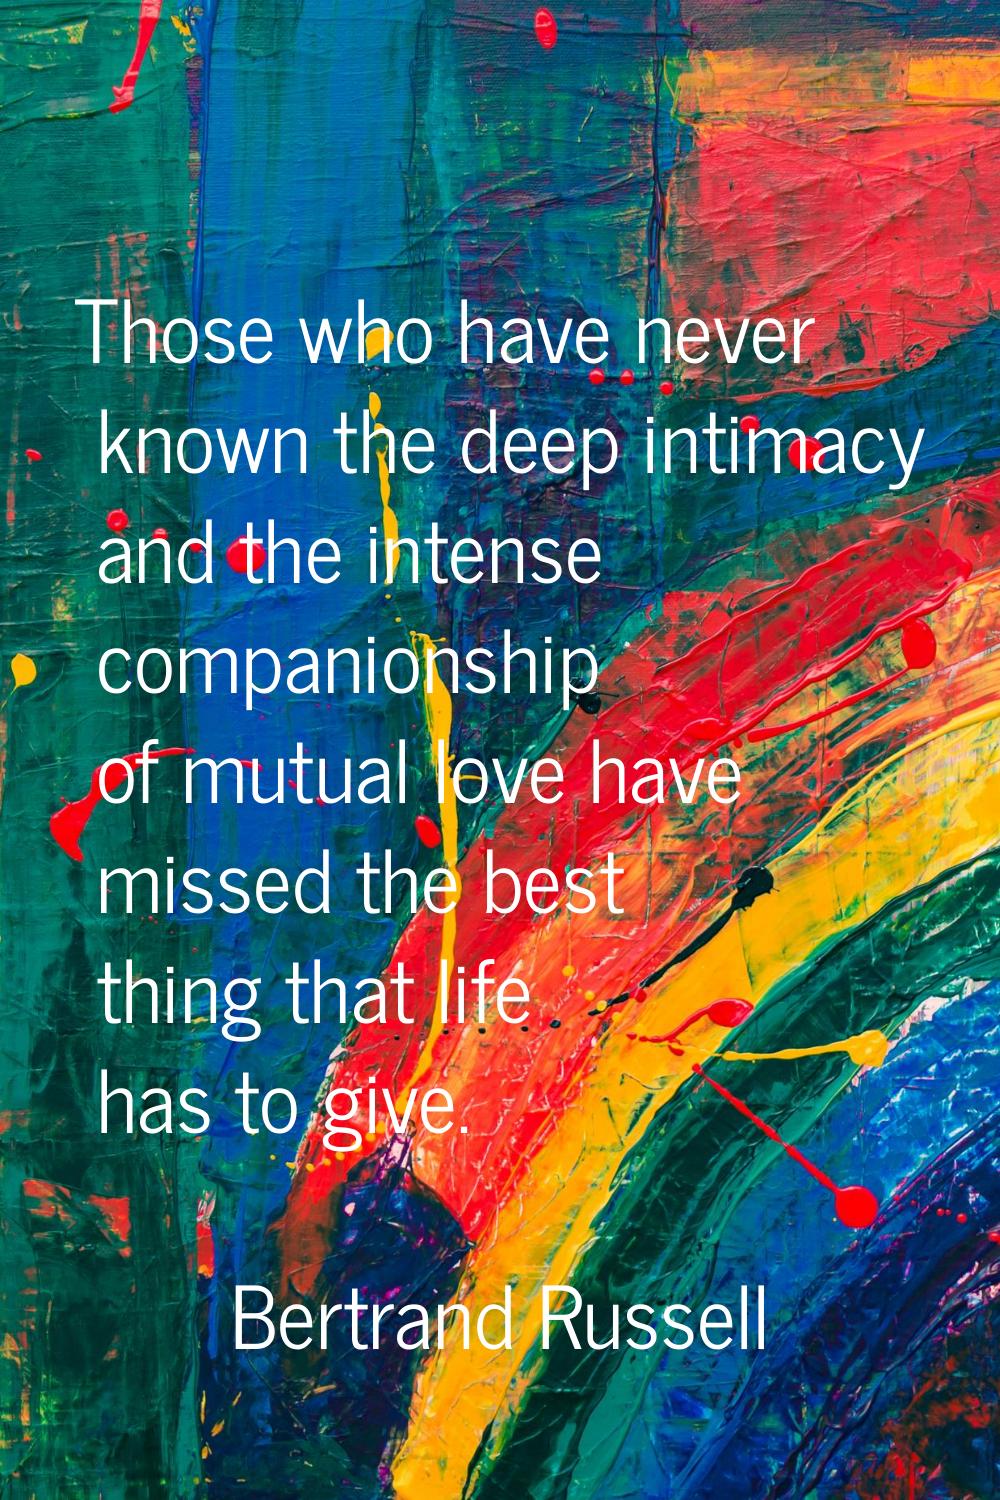 Those who have never known the deep intimacy and the intense companionship of mutual love have miss